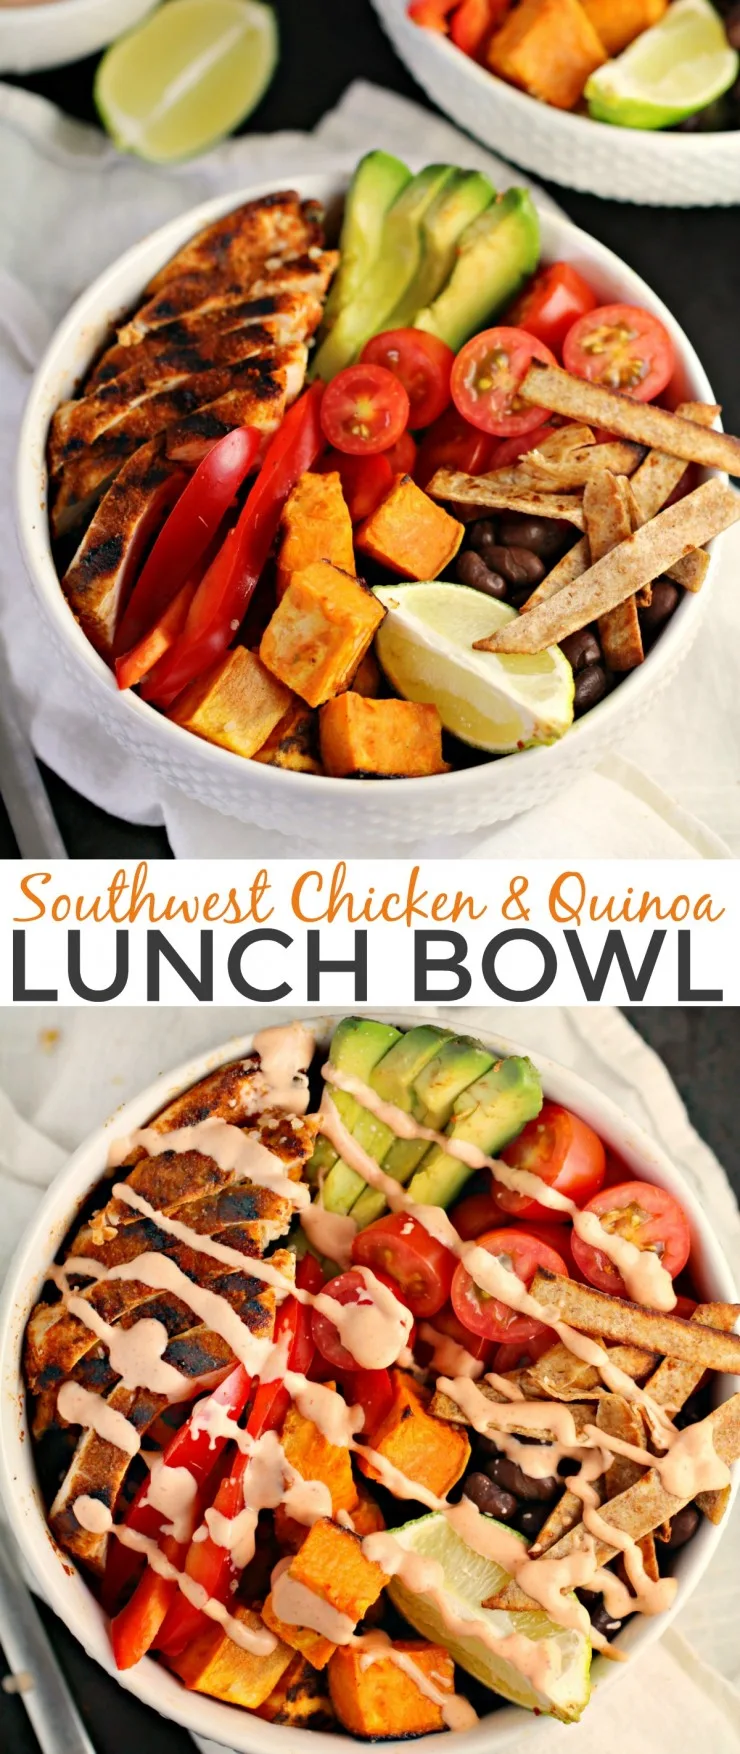 This Southwest Chicken and Quinoa Lunch Bowl is a delicious, and spicy lunch that is so satisfying and full of fresh flavours.